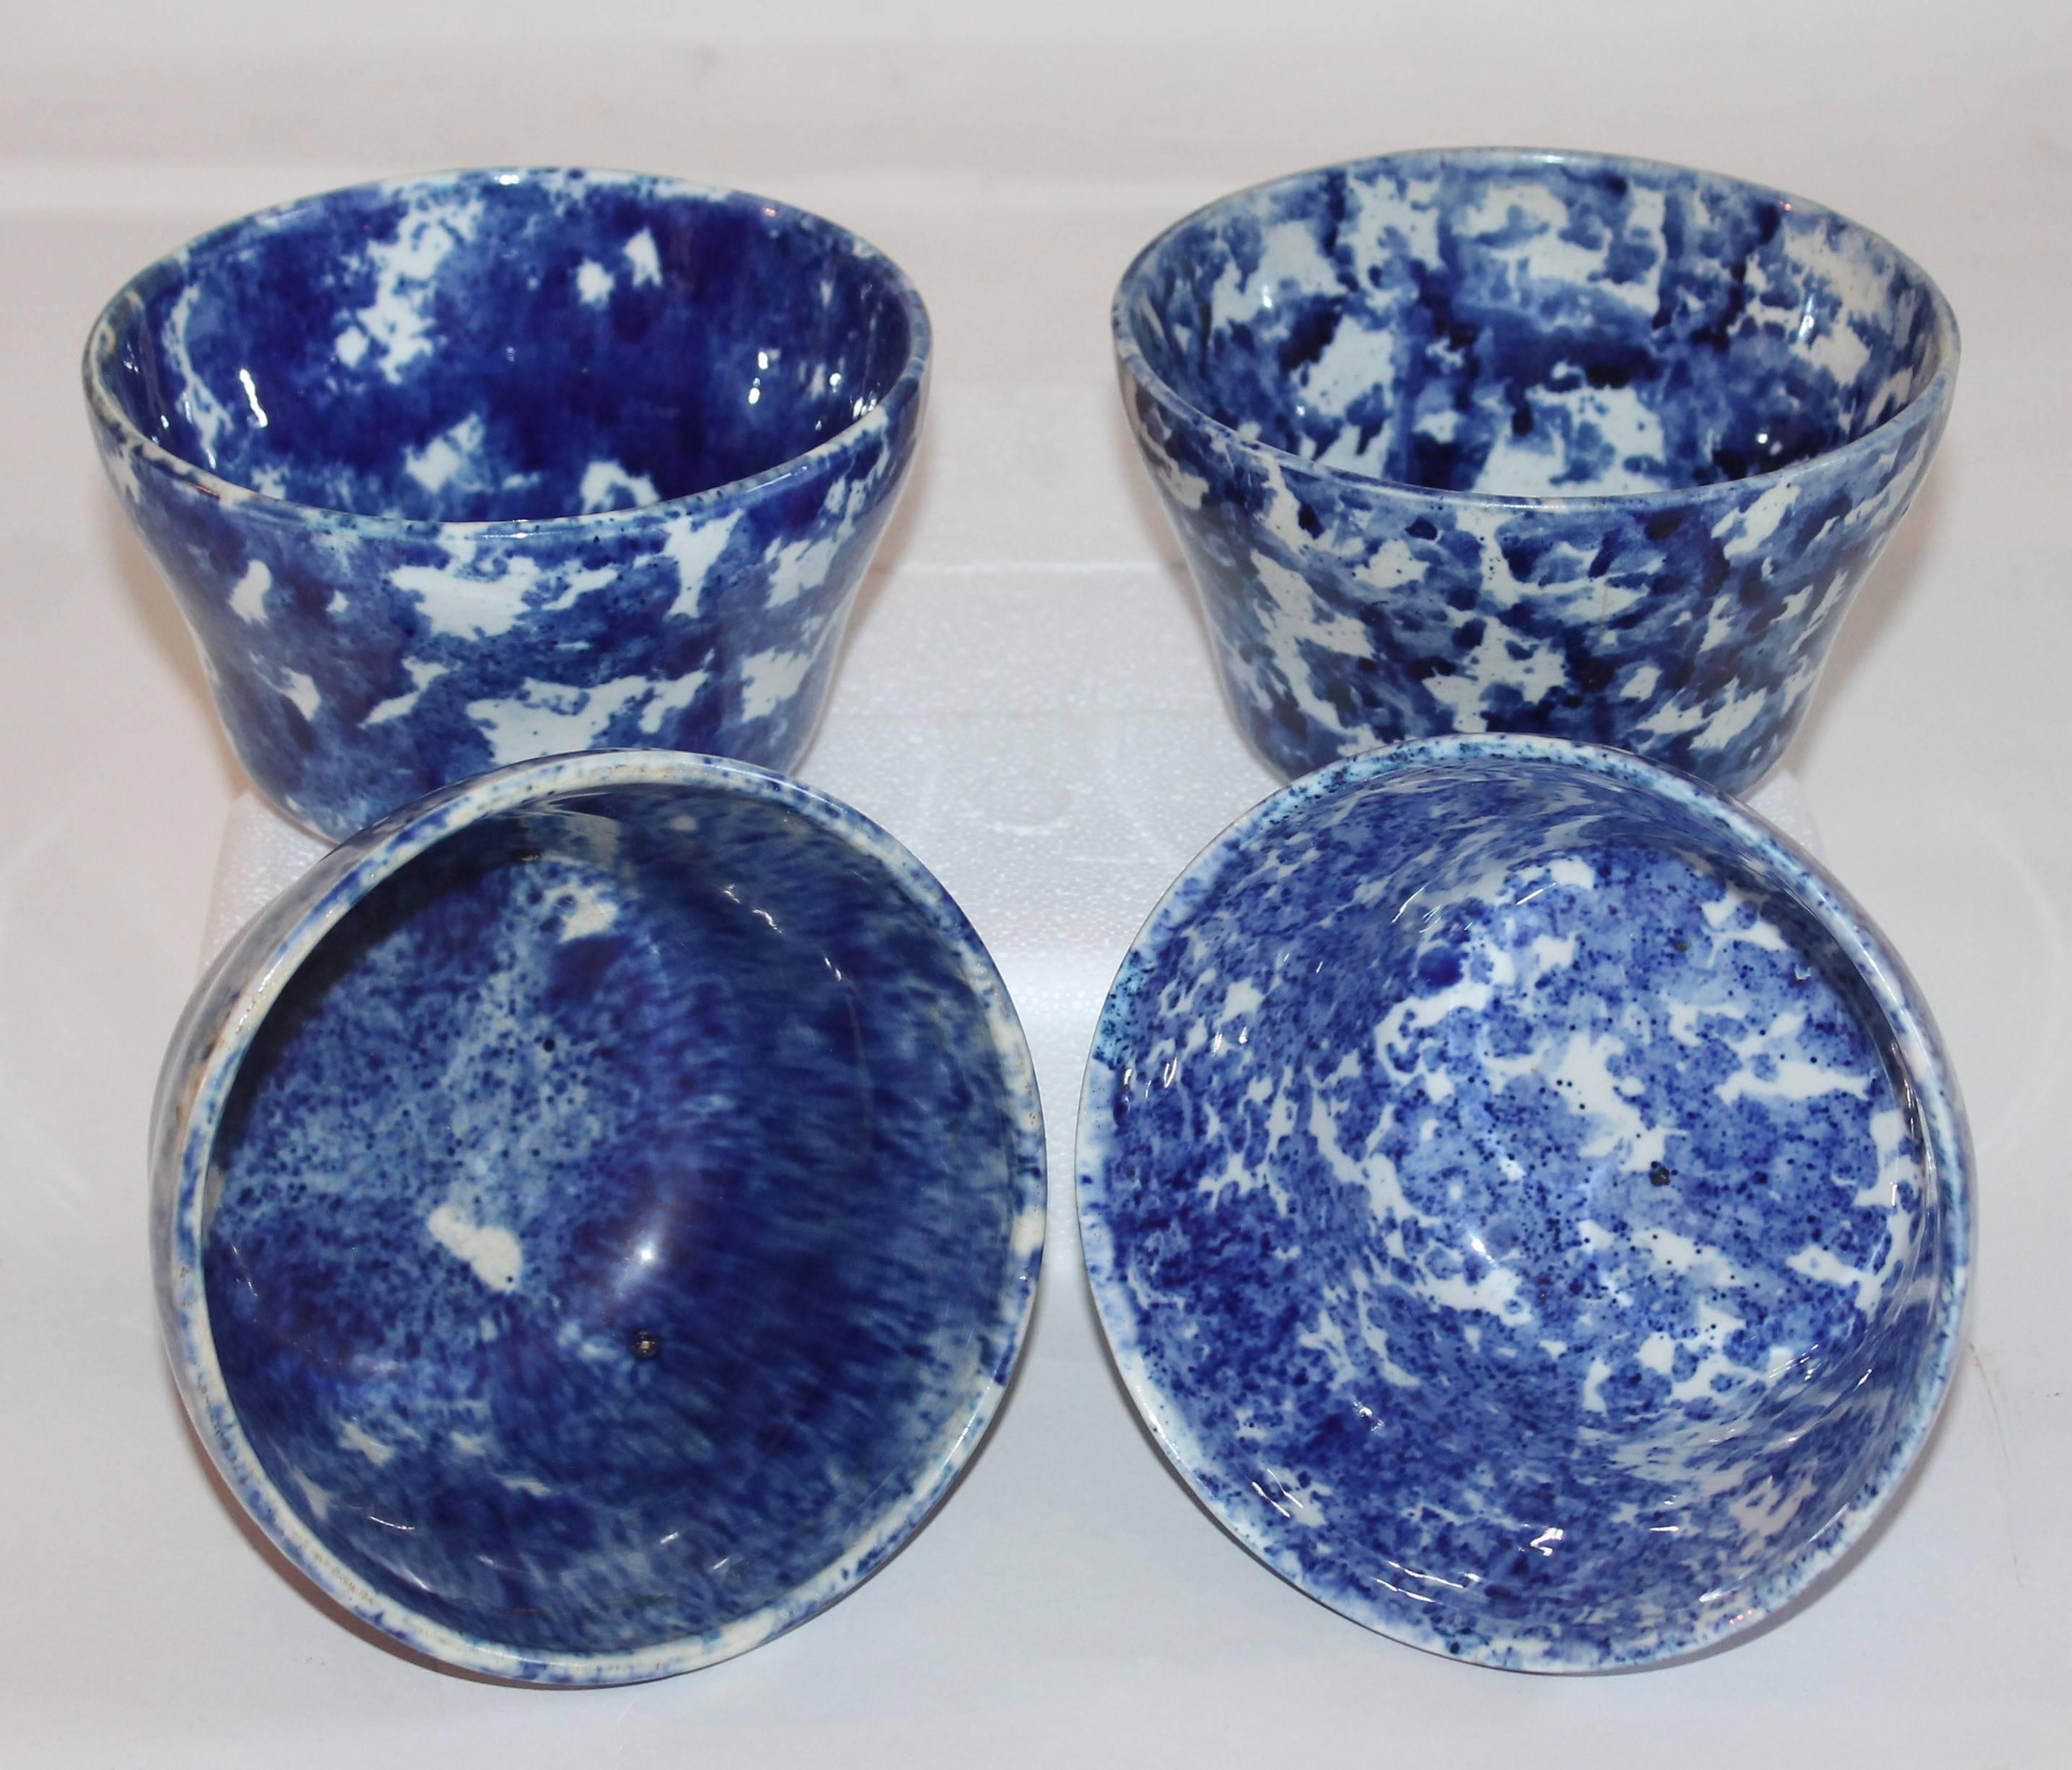 American Sponge Ware 19th Century Pottery Large Bowls Collection of Four